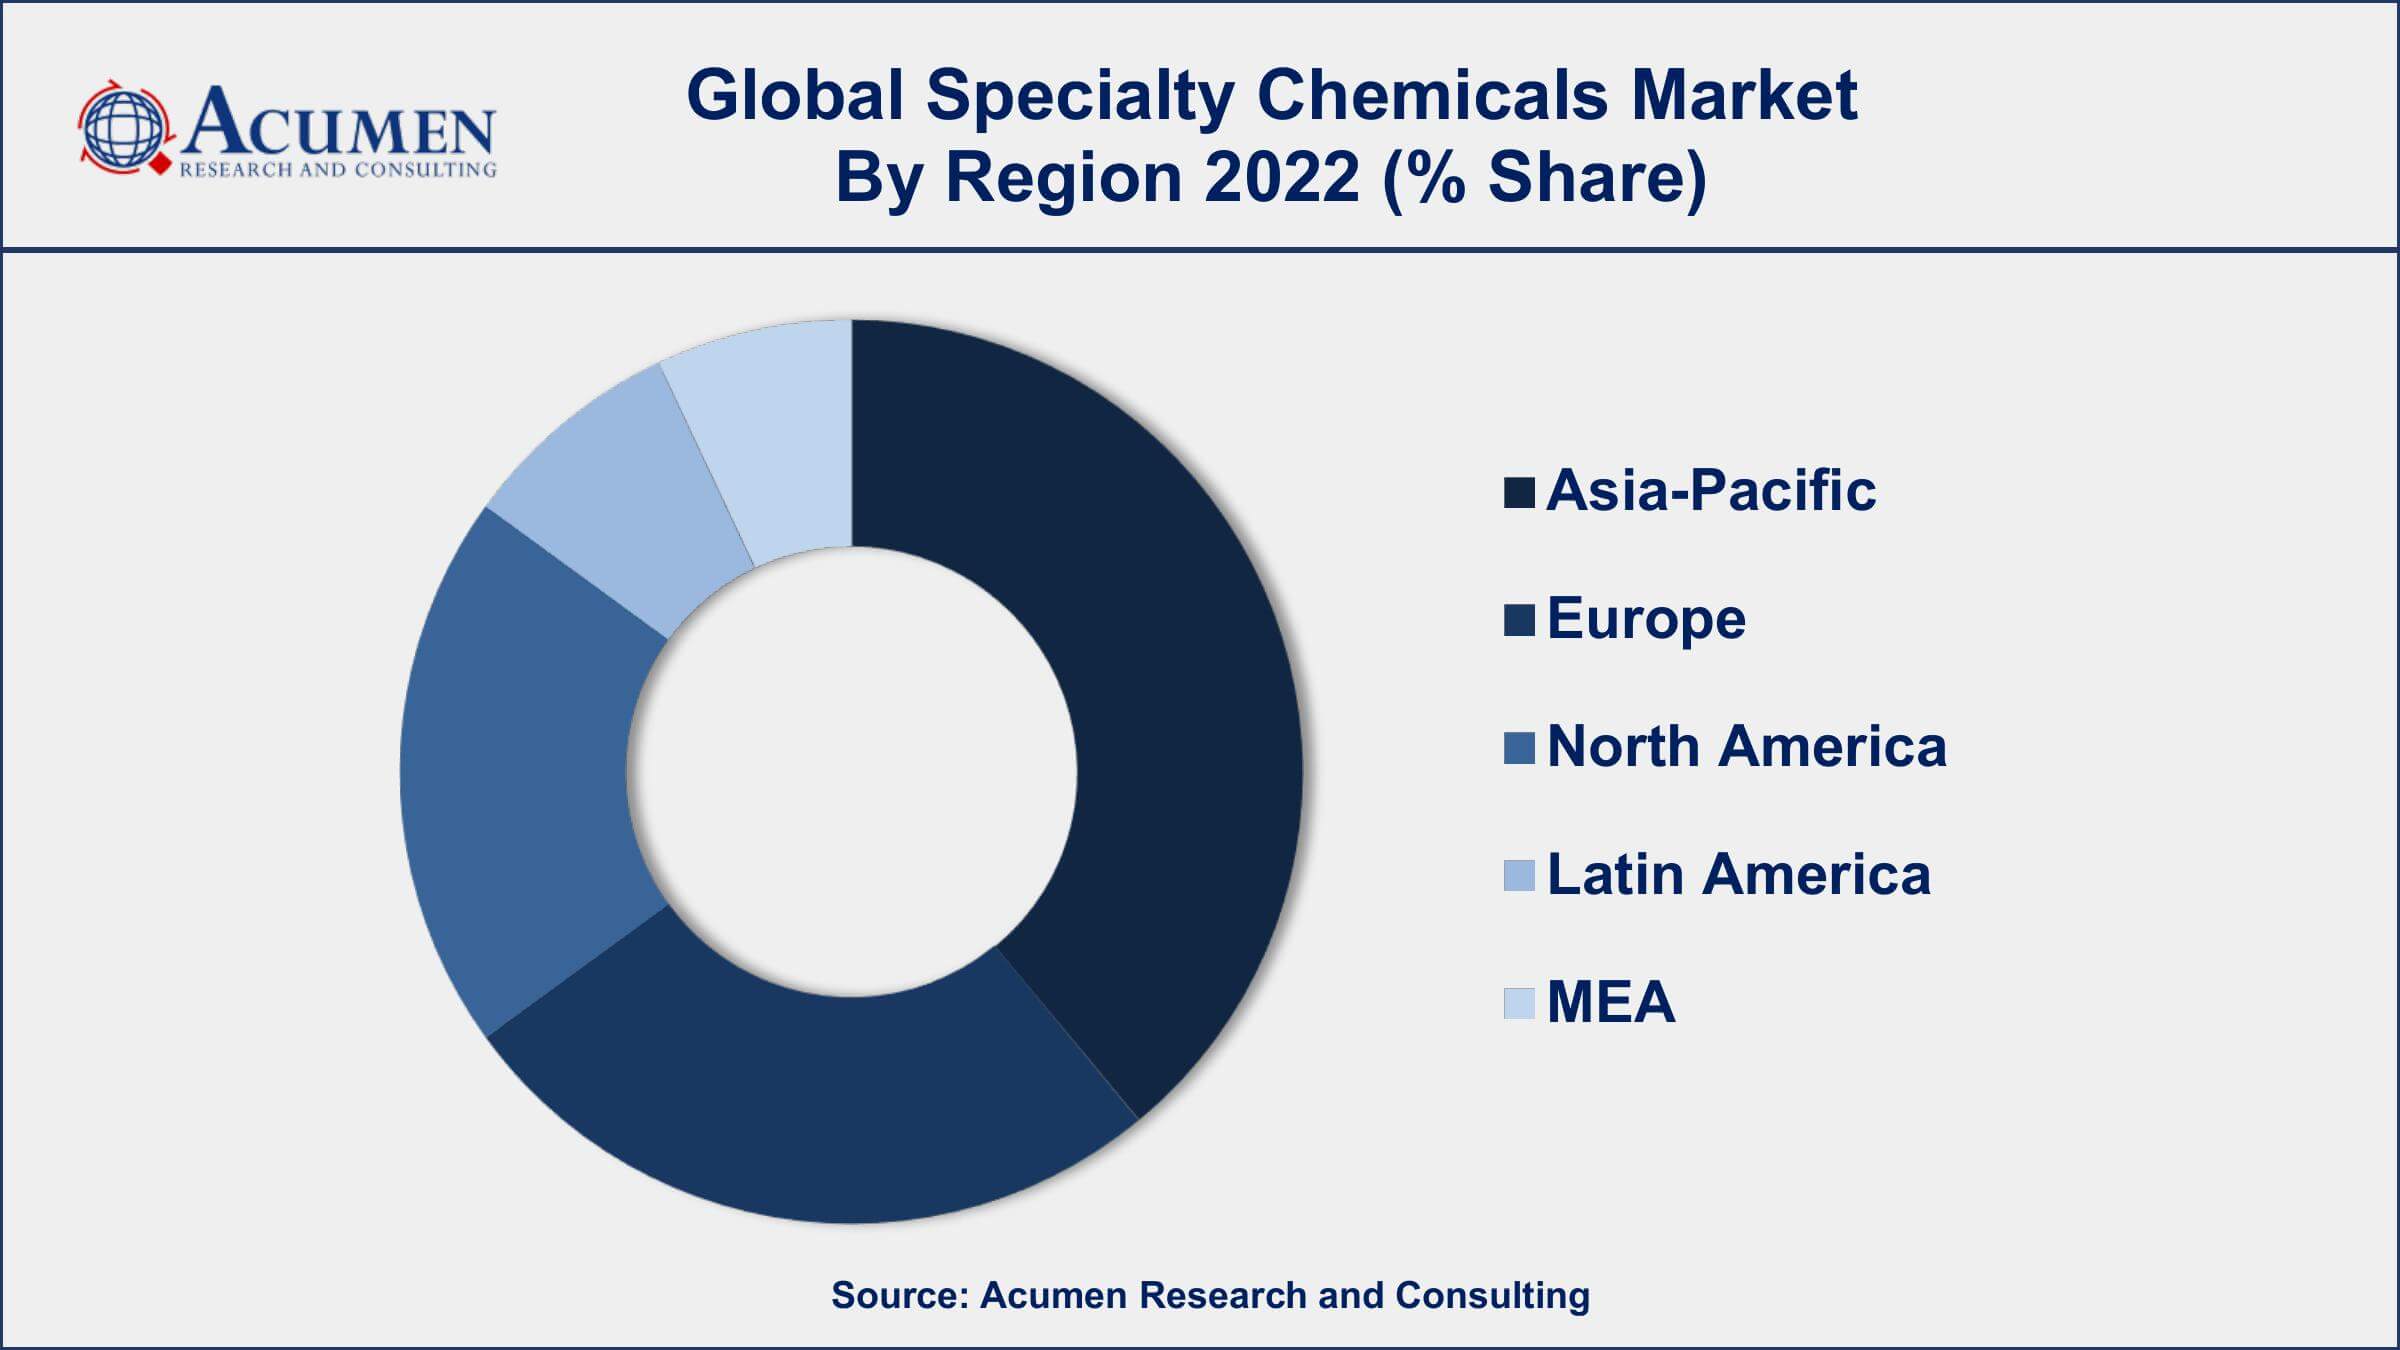 Specialty Chemicals Market Drivers